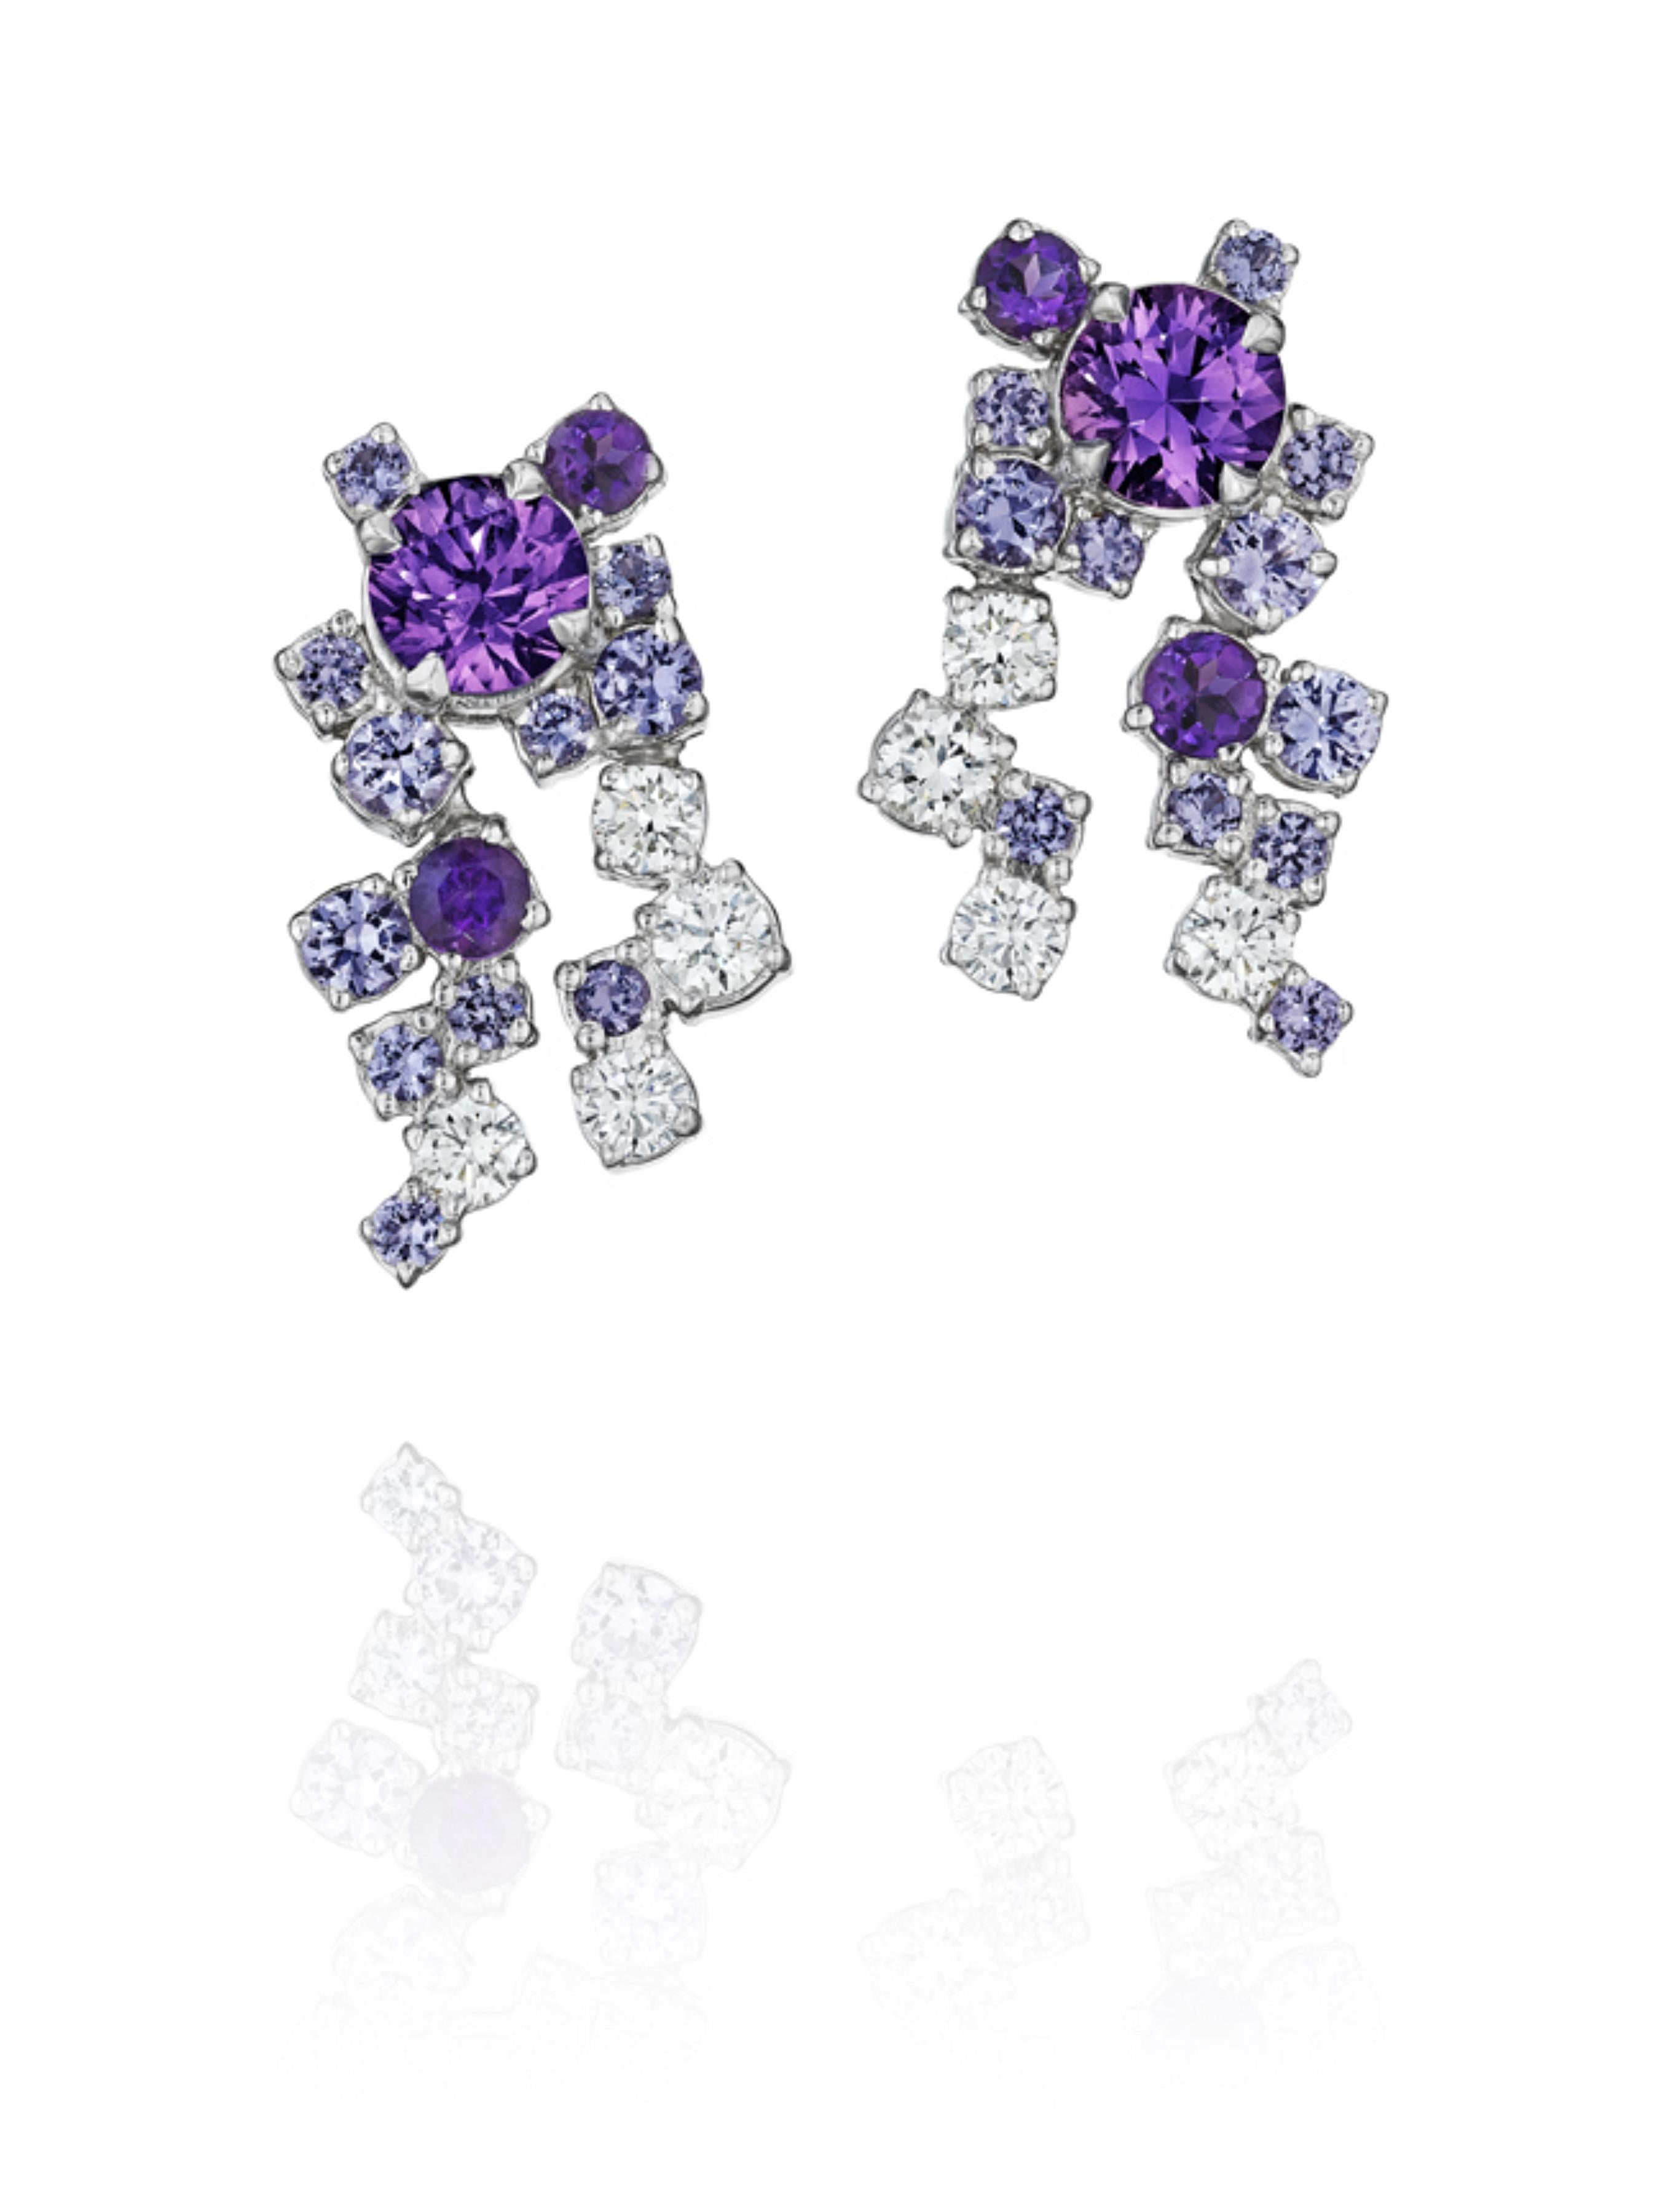 Brilliant Cut Melting Ice 18k White Gold Purple Sapphire Earrings by MadStone For Sale